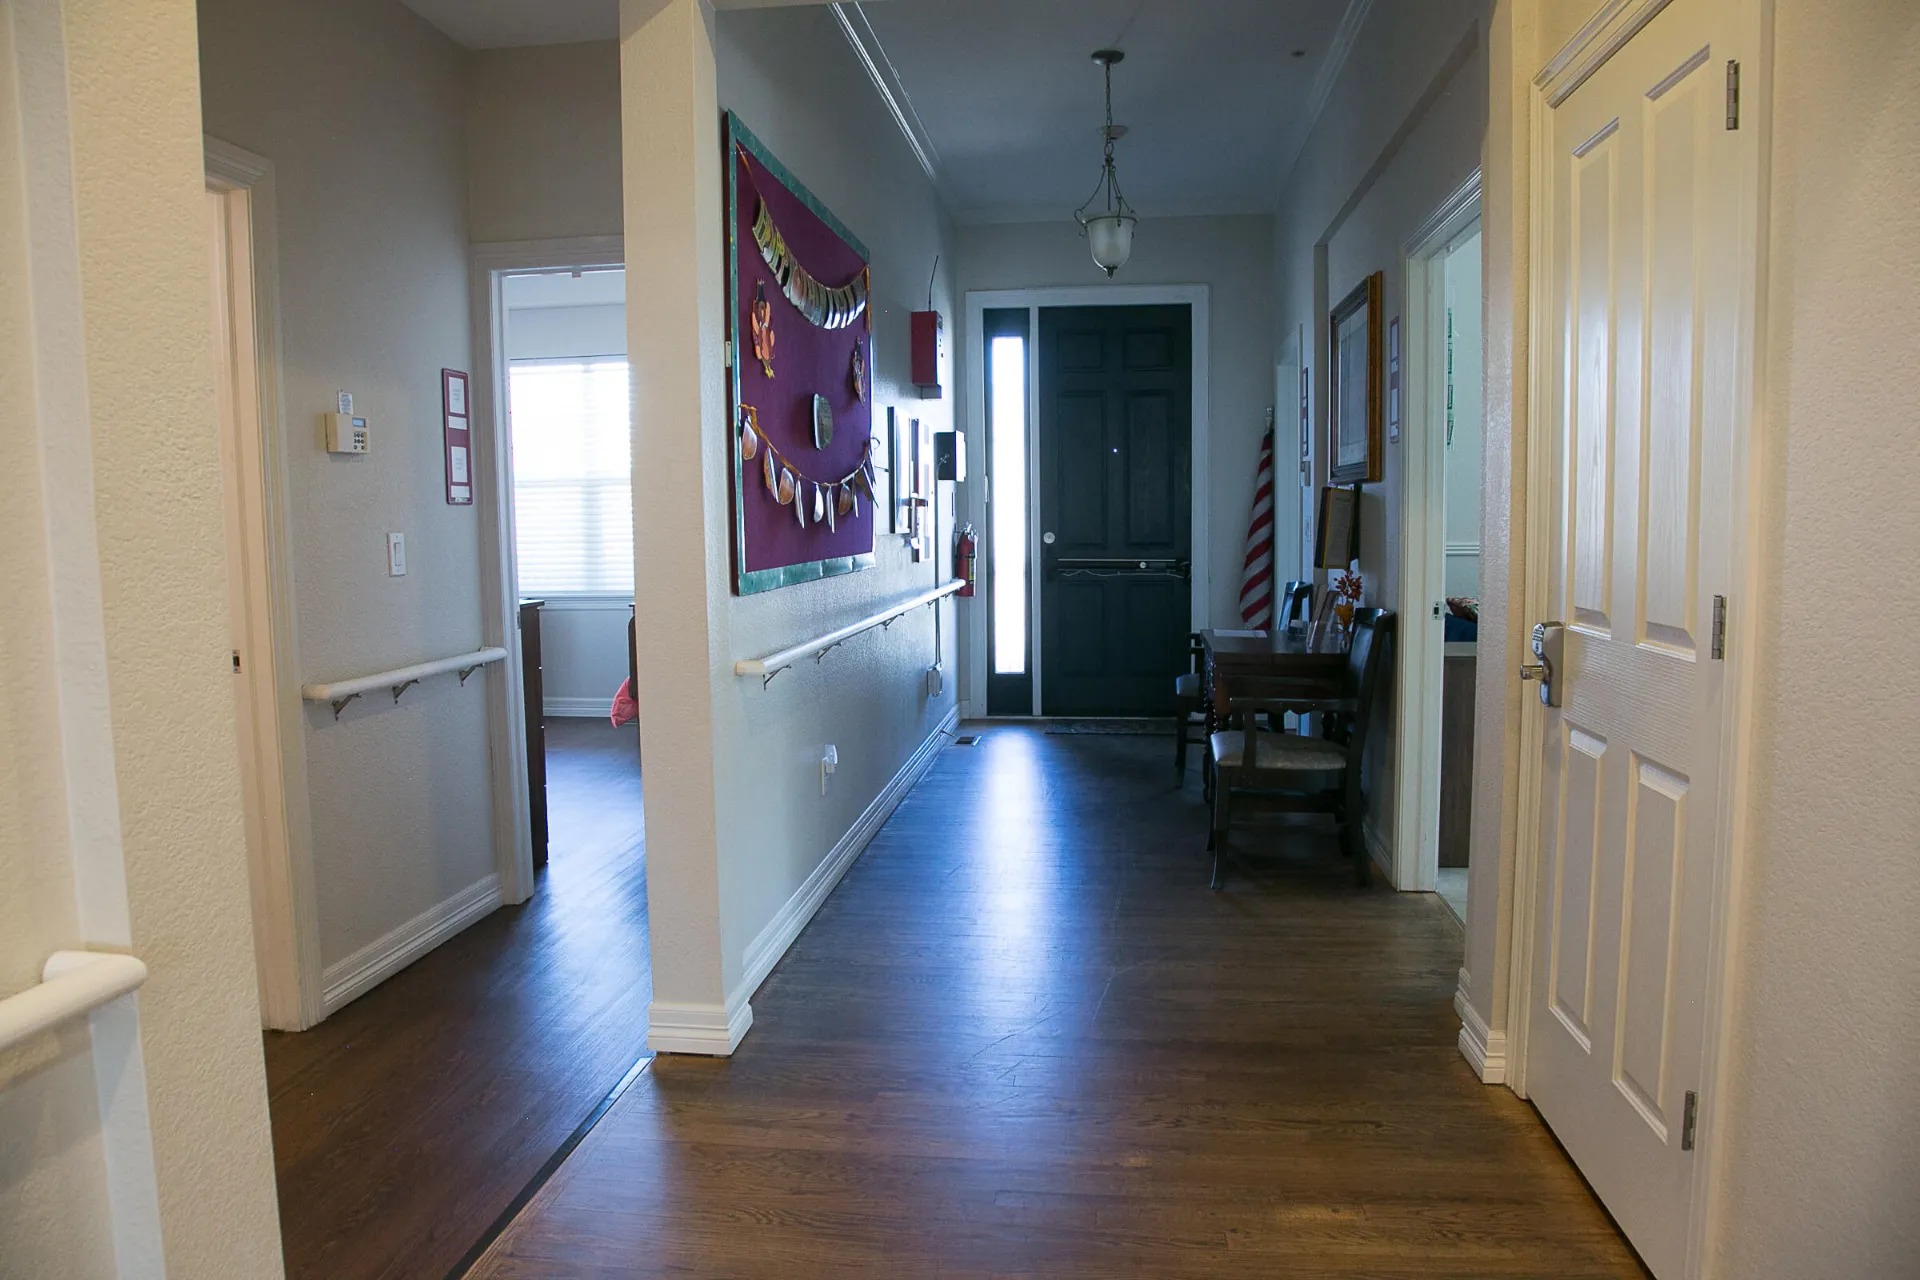 Our hallway with an assistive rail along the the wall.